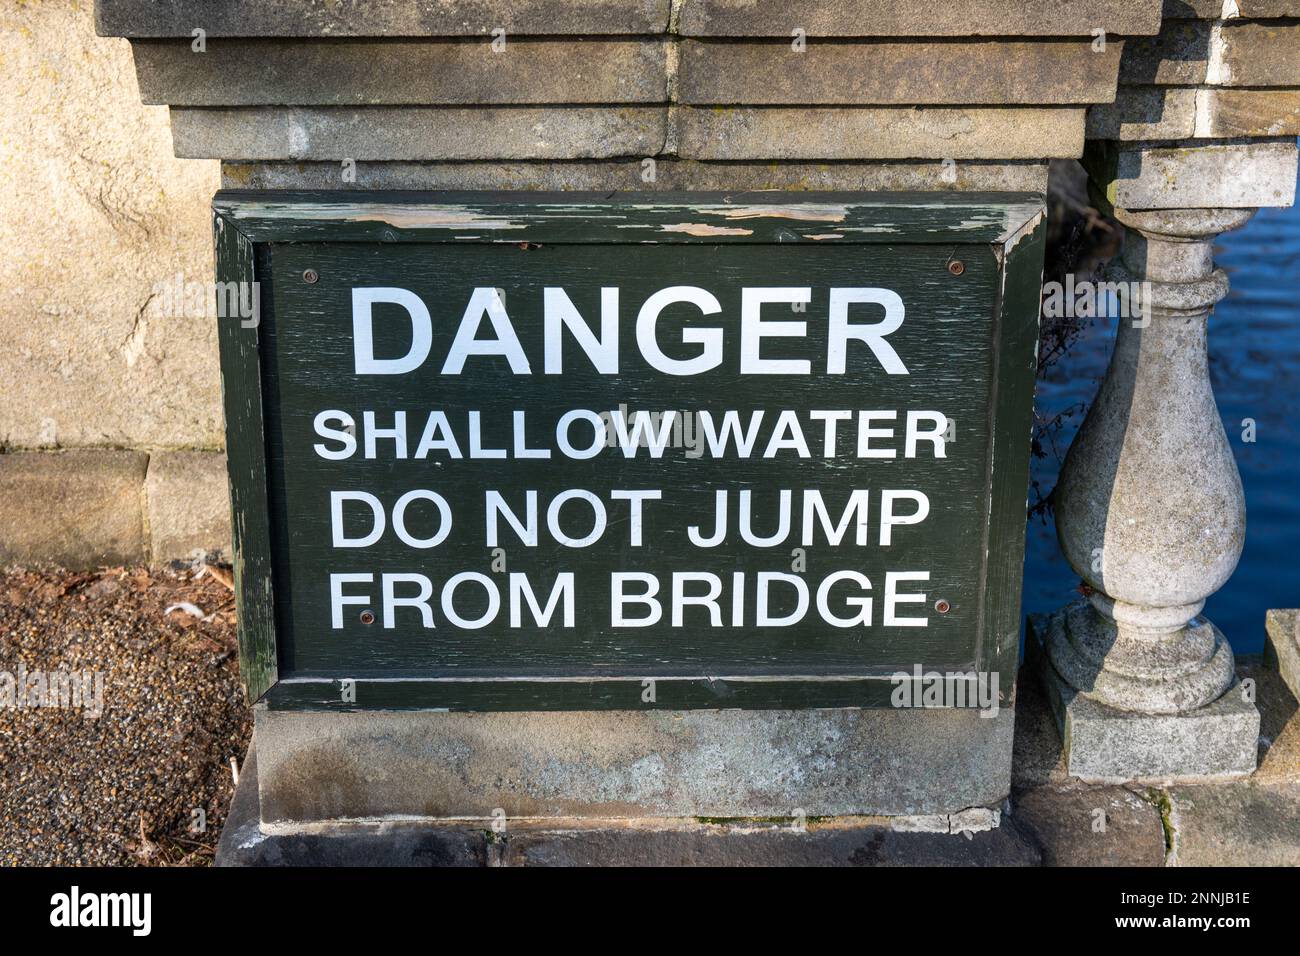 Danger. Shallow water. Do not jump from the bridge. Warning sign on Serpentine Bridge dividing Hyde Park and Kensington Gardens in London, England. Stock Photo